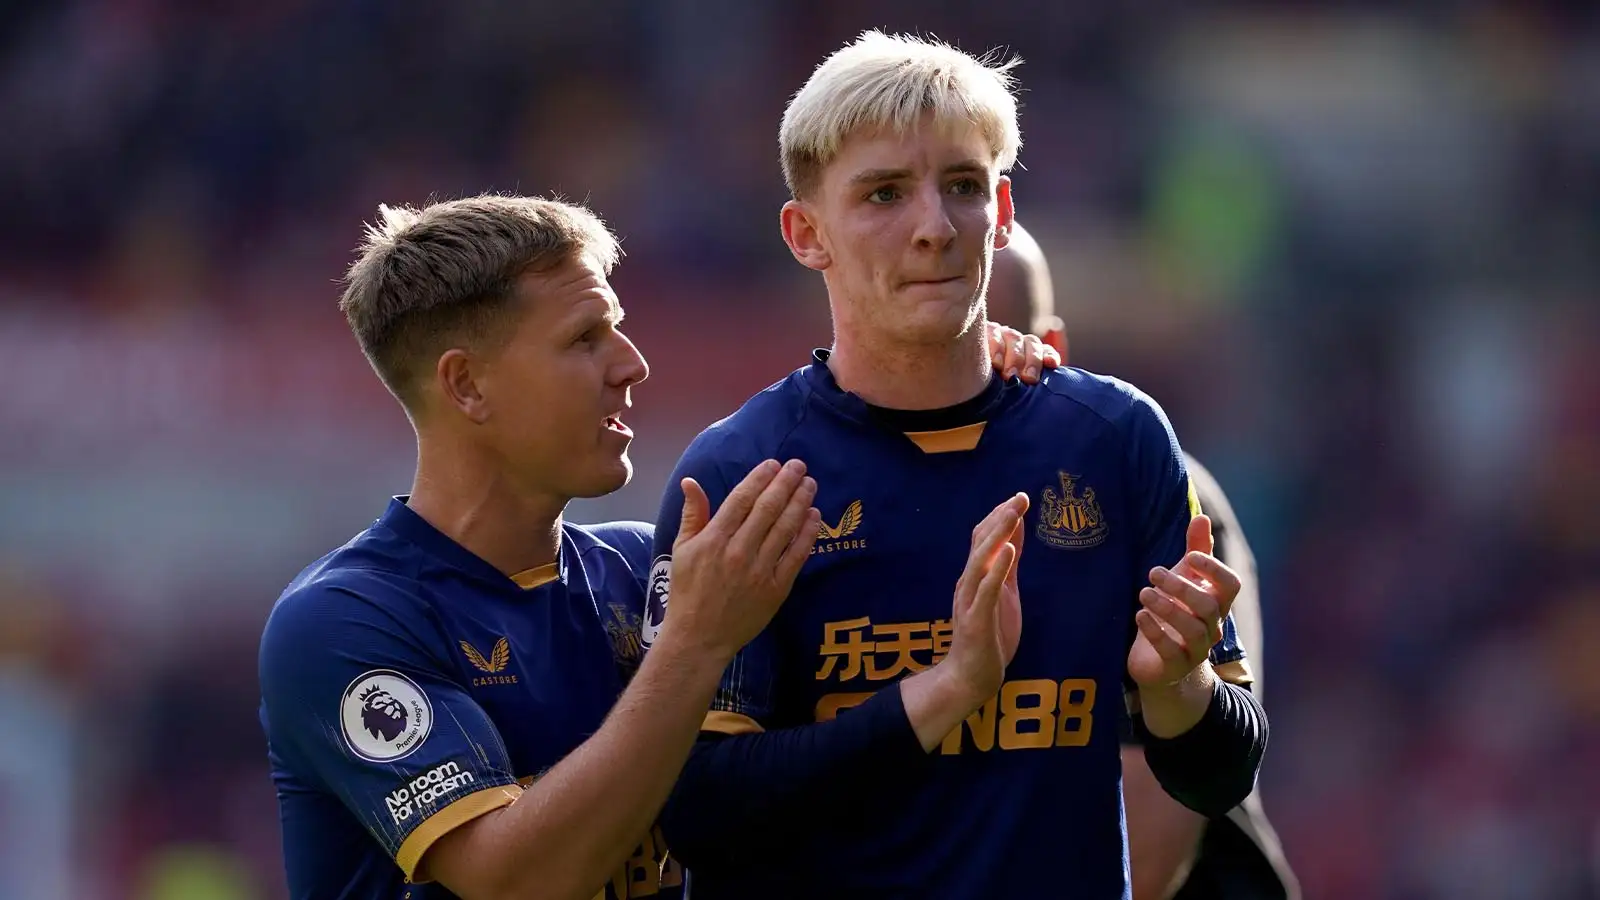 Newcastle United's Matt Ritchie speaks with team mate Anthony Gordon following the Premier League match at the Gtech Community Stadium, London. Picture date: Saturday April 8, 2023.